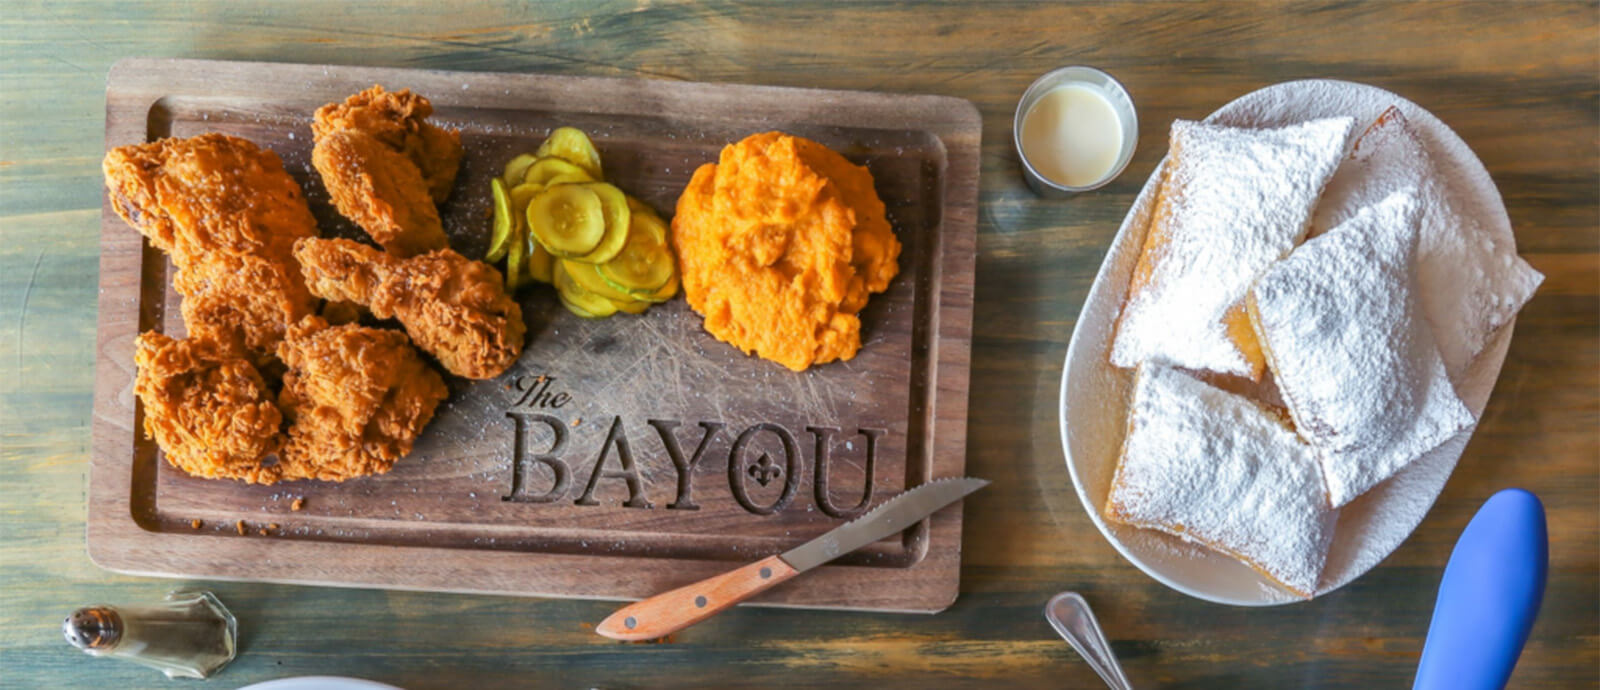 Fried chicken, pickles, a dollop of mashed sweet potatoes, and a small knife on a cutting board engraved with The Bayou.